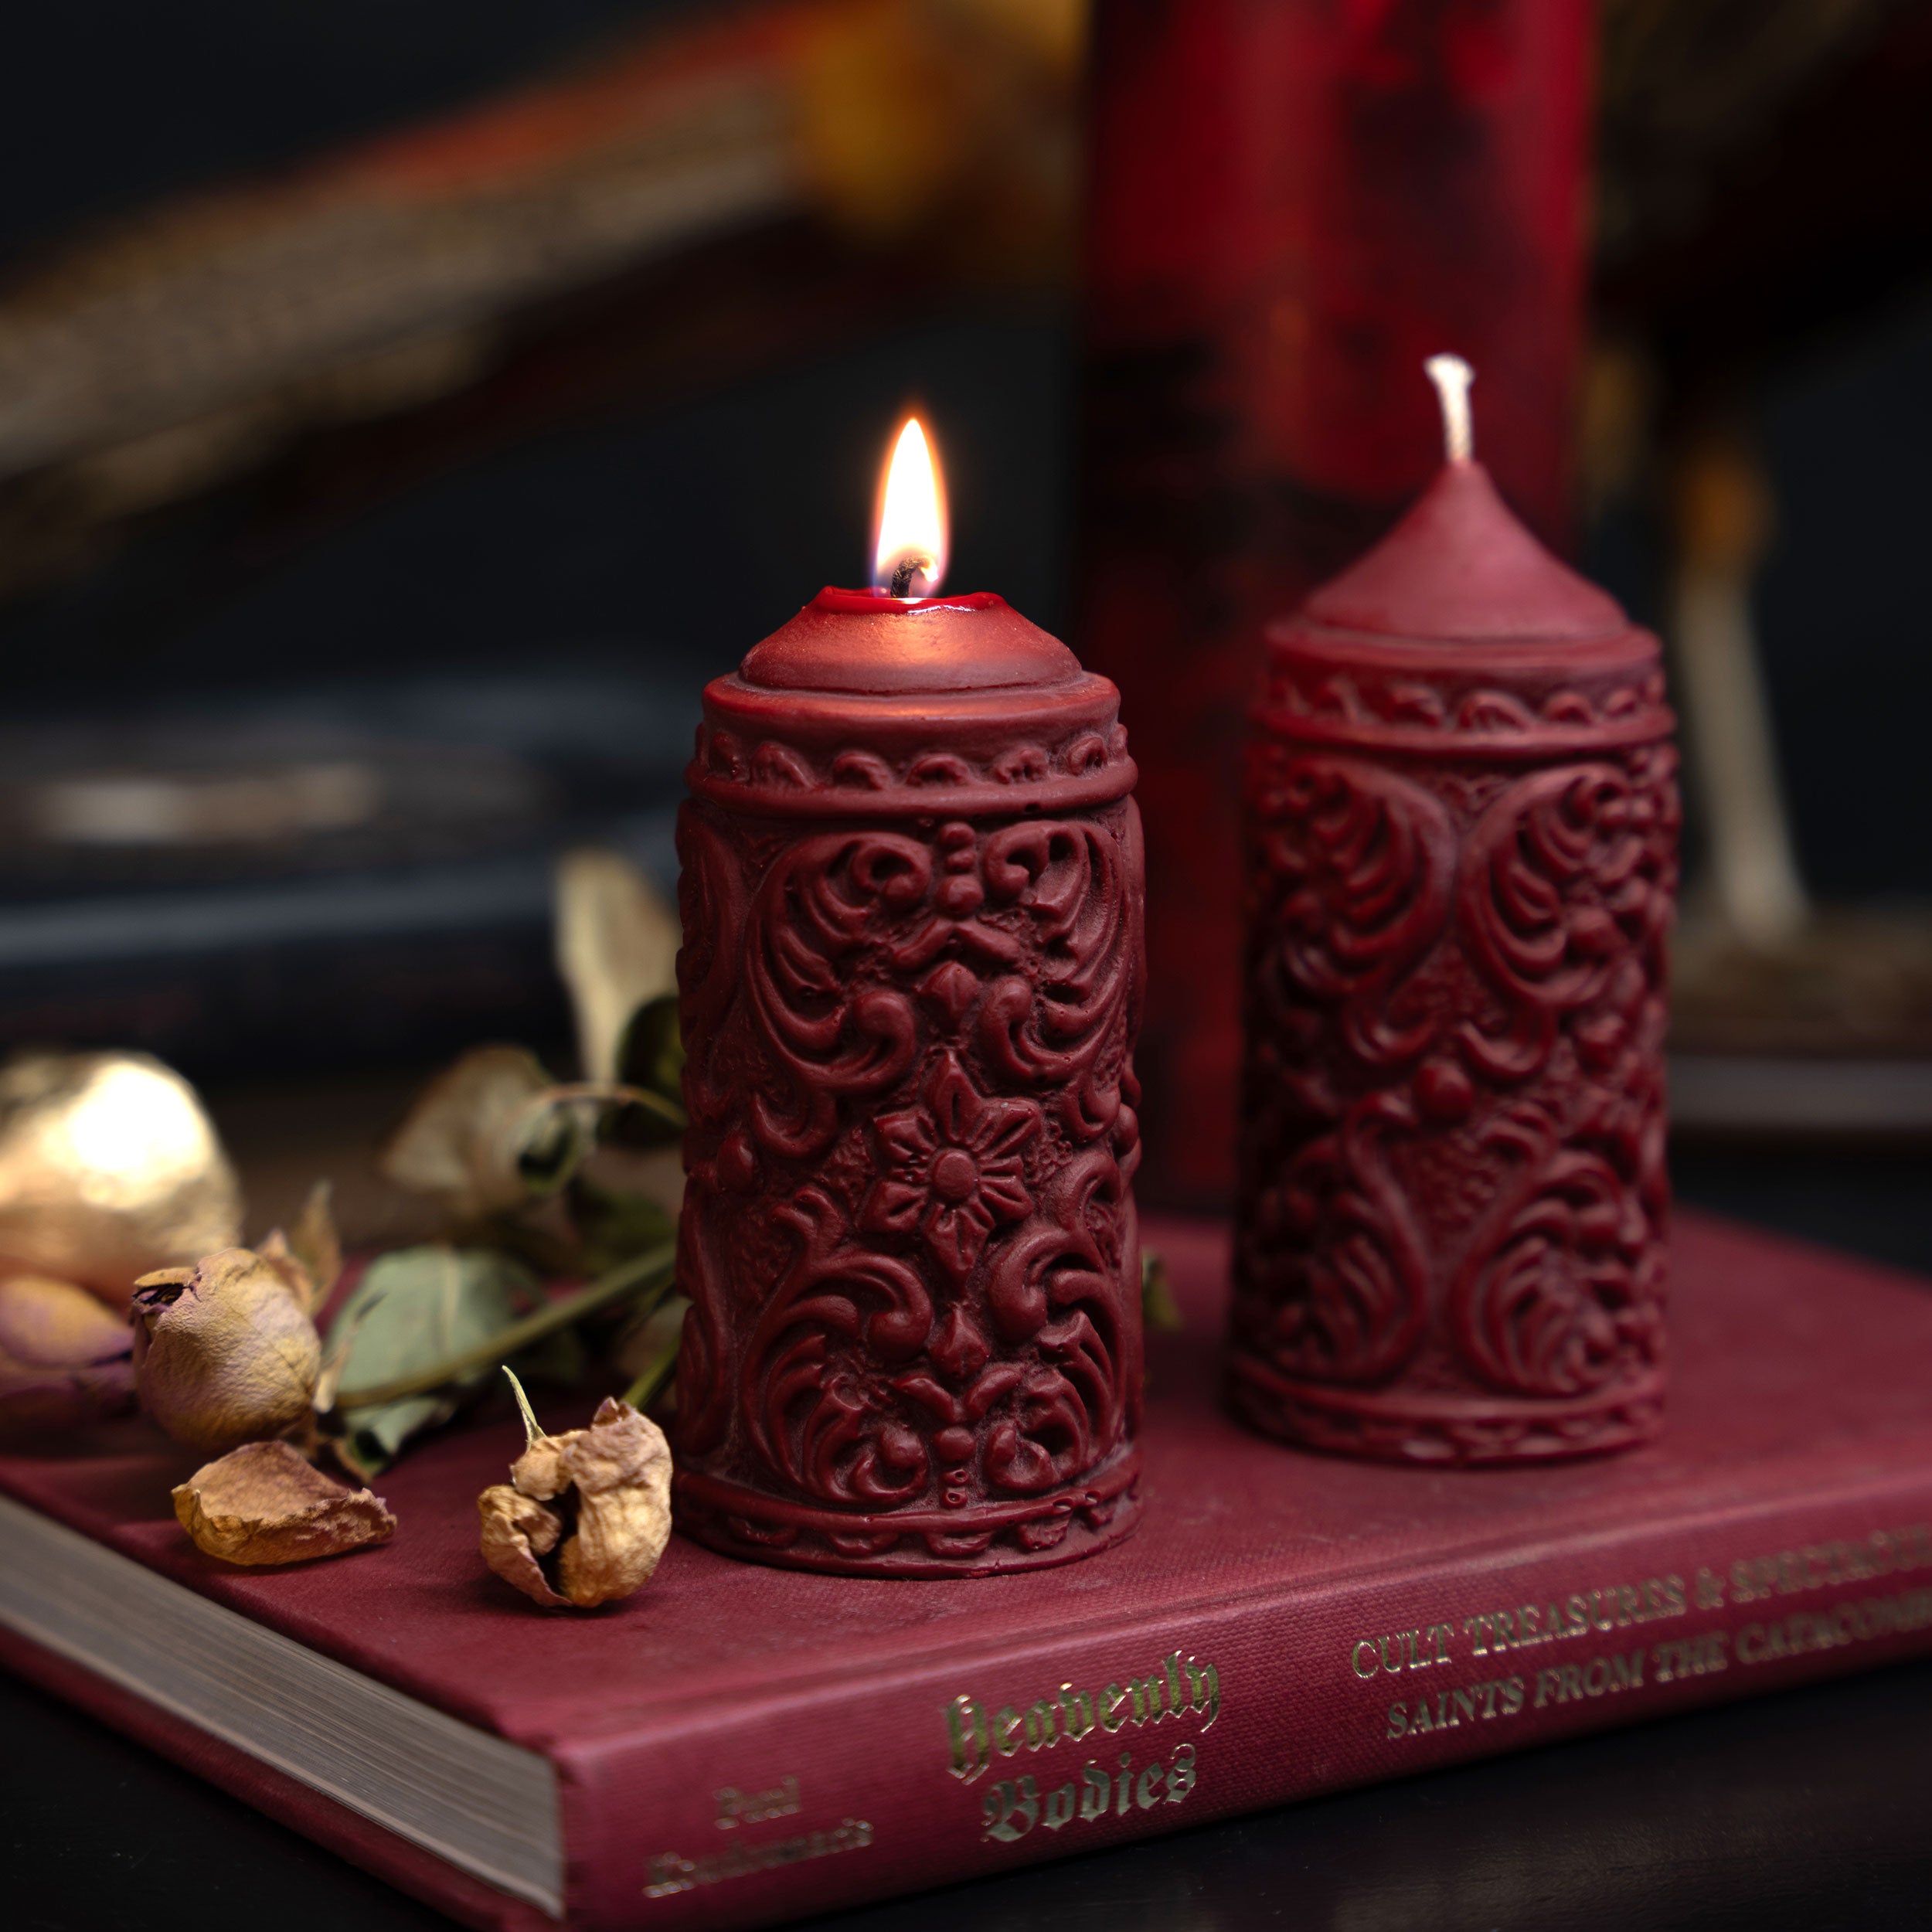 Mildred gothic candle - Crimson red - The Blackened teeth - Gothic decor